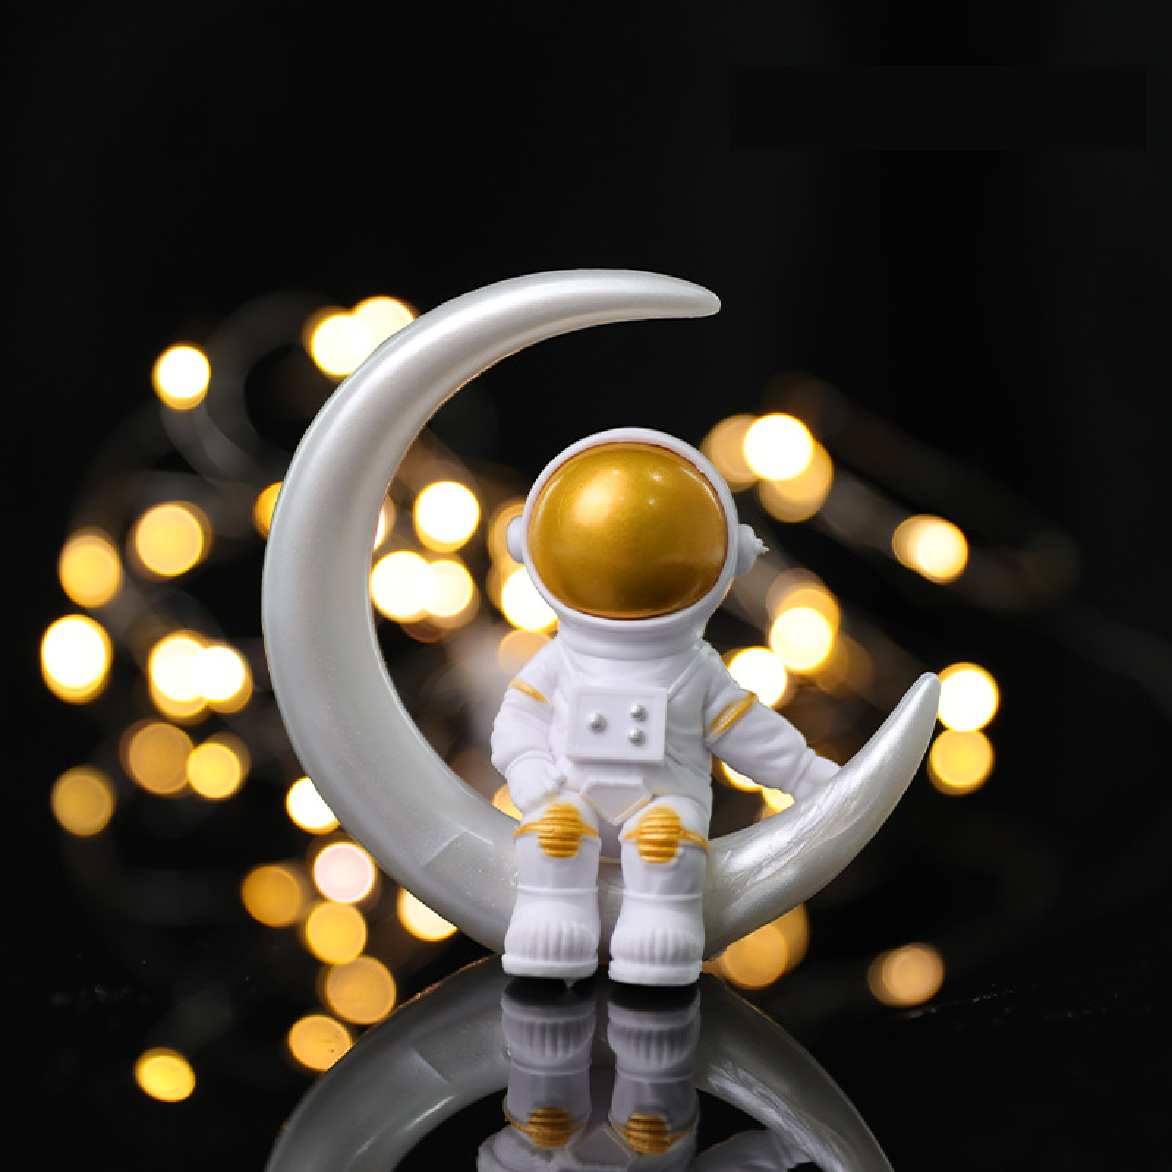 Cake Decoration, Cupcake Topper- Astronaut with Moon- Space scene - Rampant Coffee Company